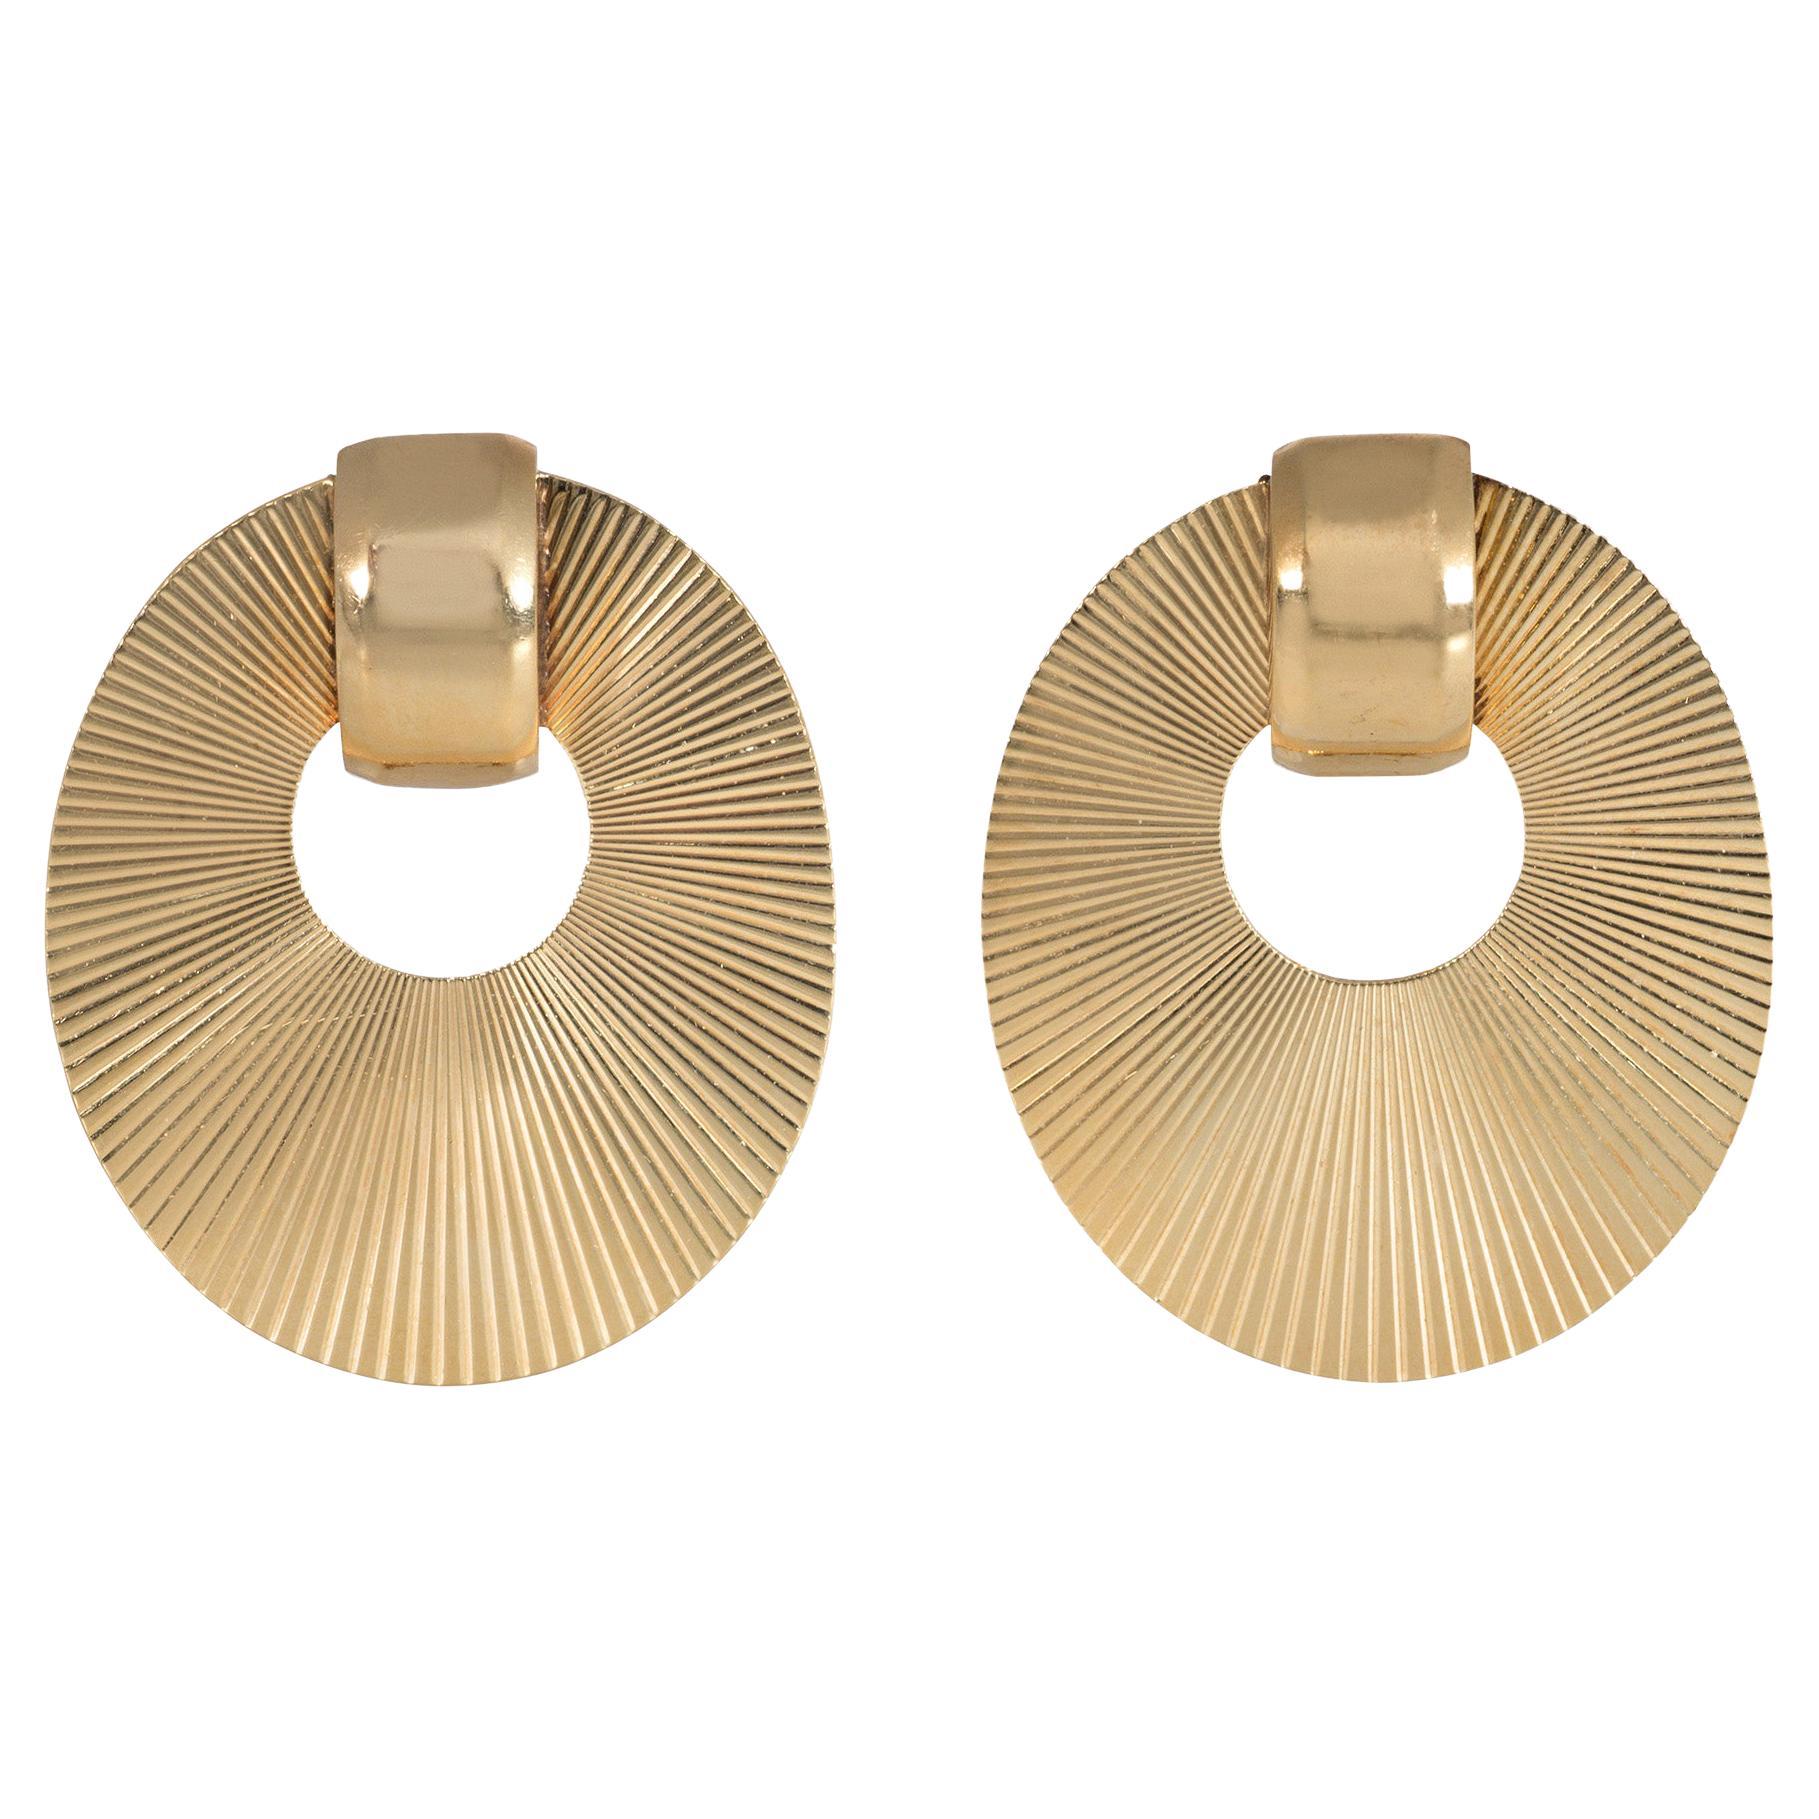 Pair of Retro Gold Oval Disk Clip Brooches with Radial Fluted Surface